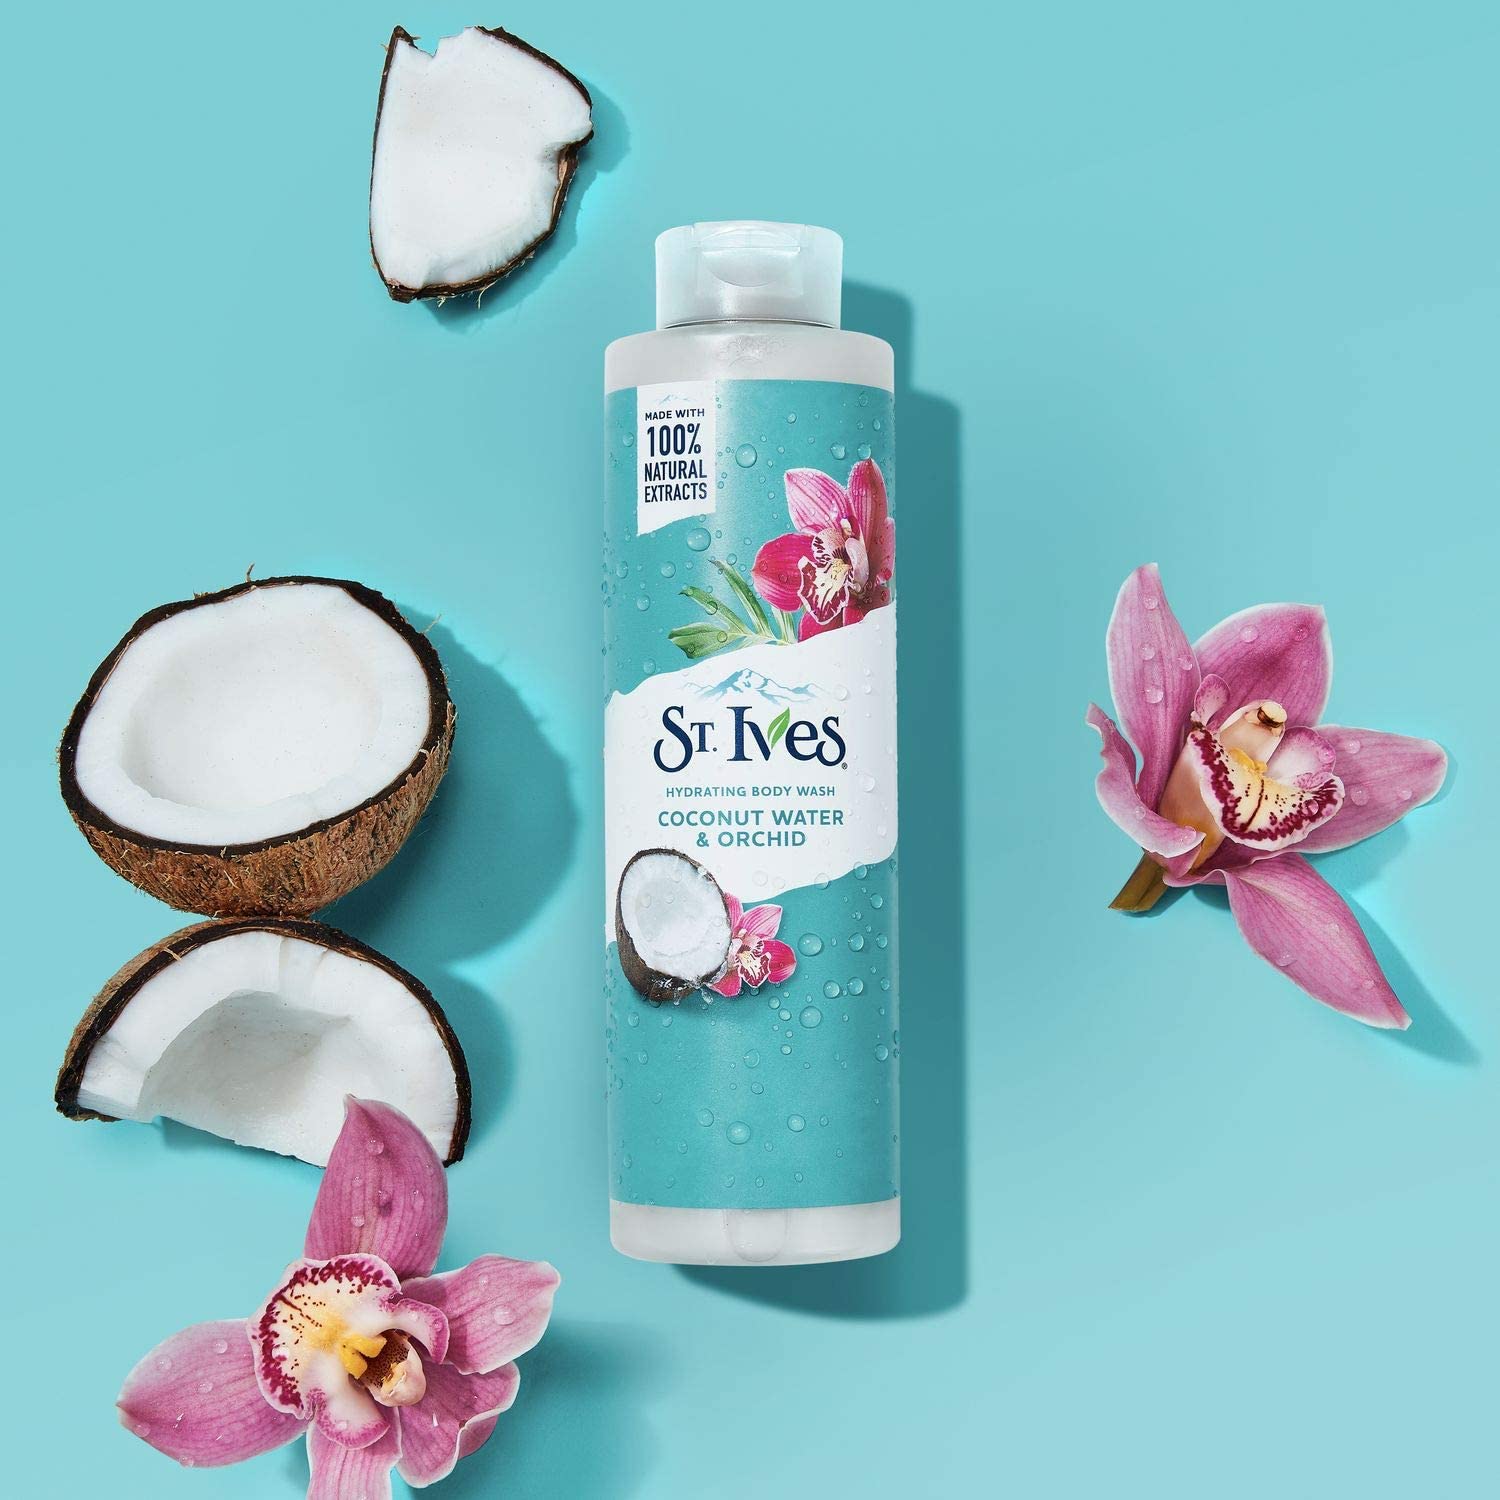 St Ives Coconut Water & Orchid Body Wash (650ml) St. Ives